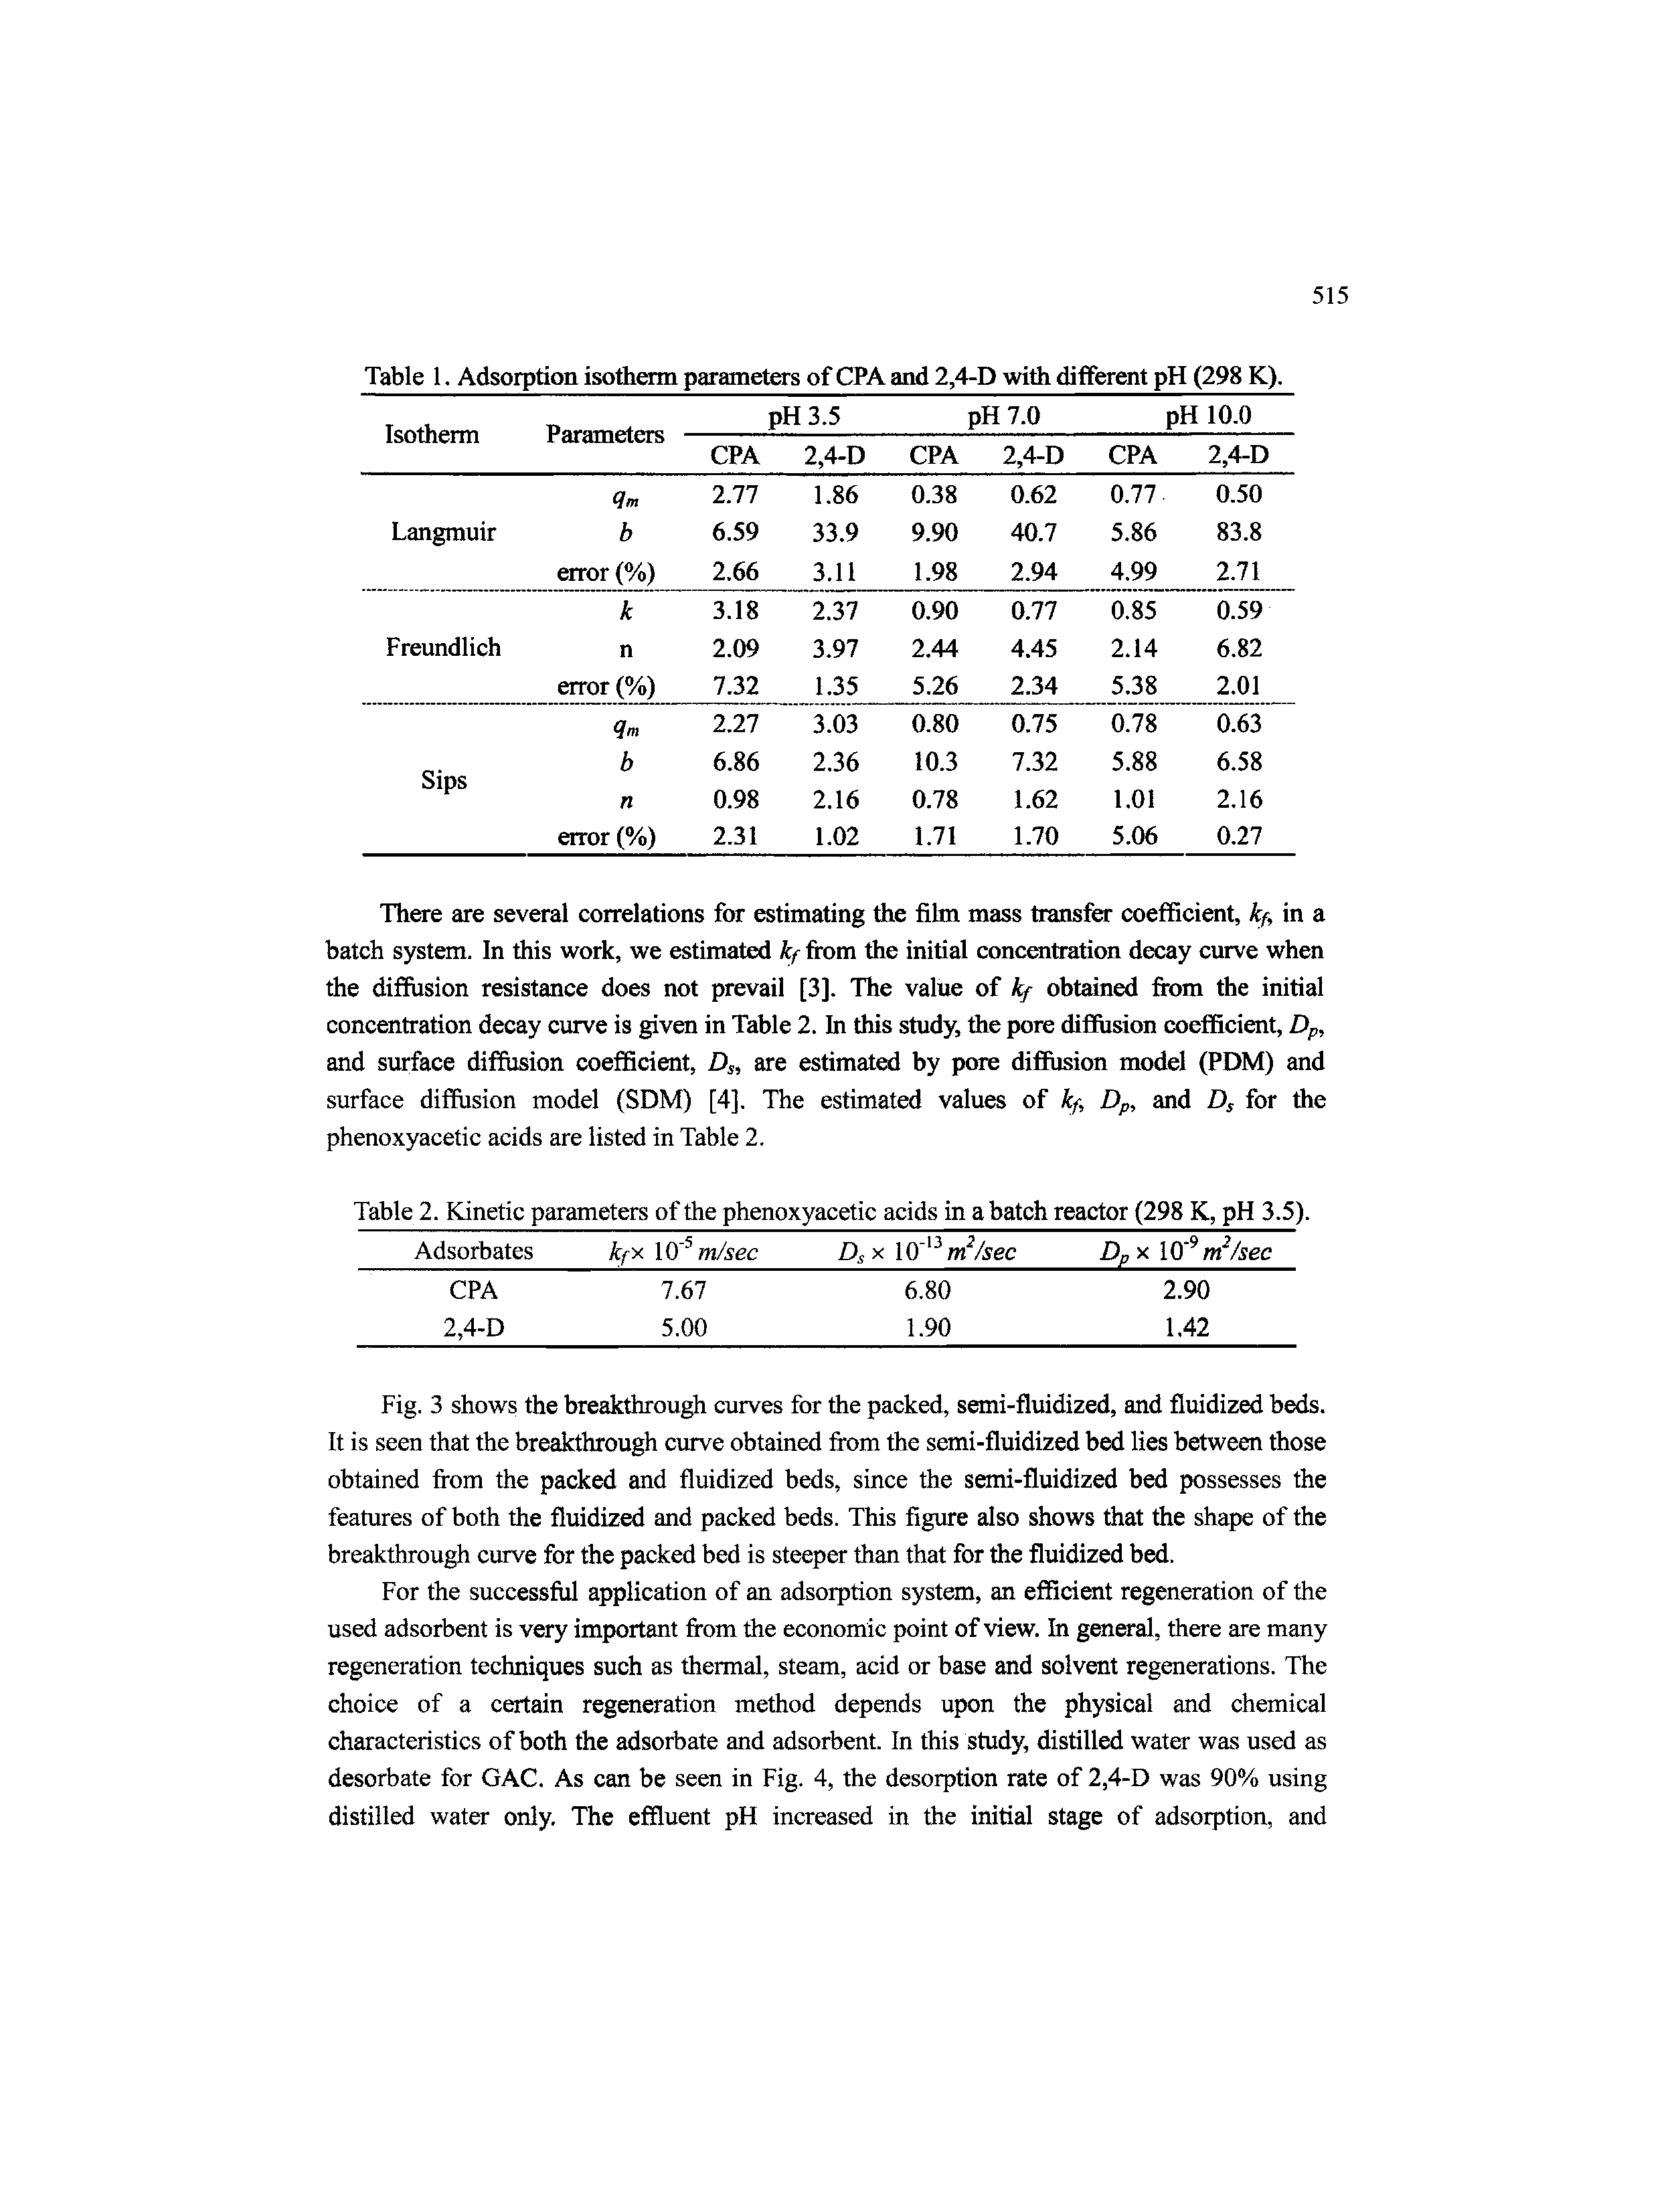 Table 1. Adsorption isotherm parameters of CPA and 2,4-D with different pH (298 K).